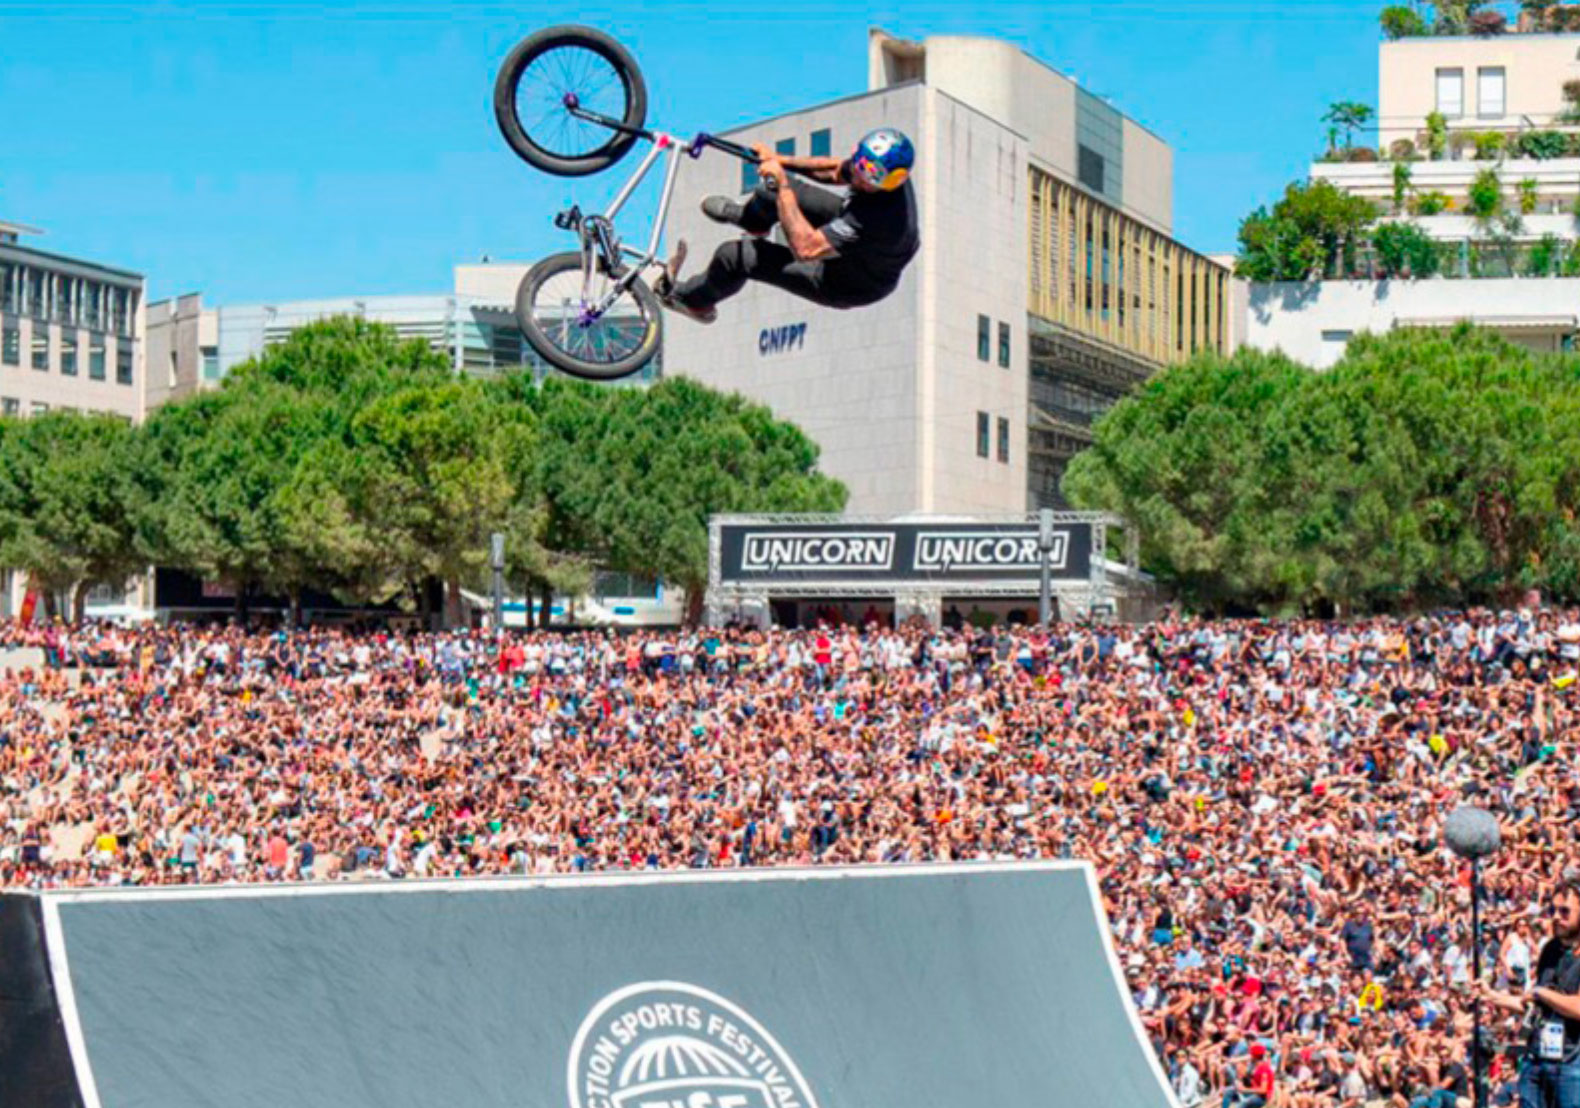 A new free festival will turn the Belgian capital into the centre stage of the world's most daring action sports and urban lifestyle.